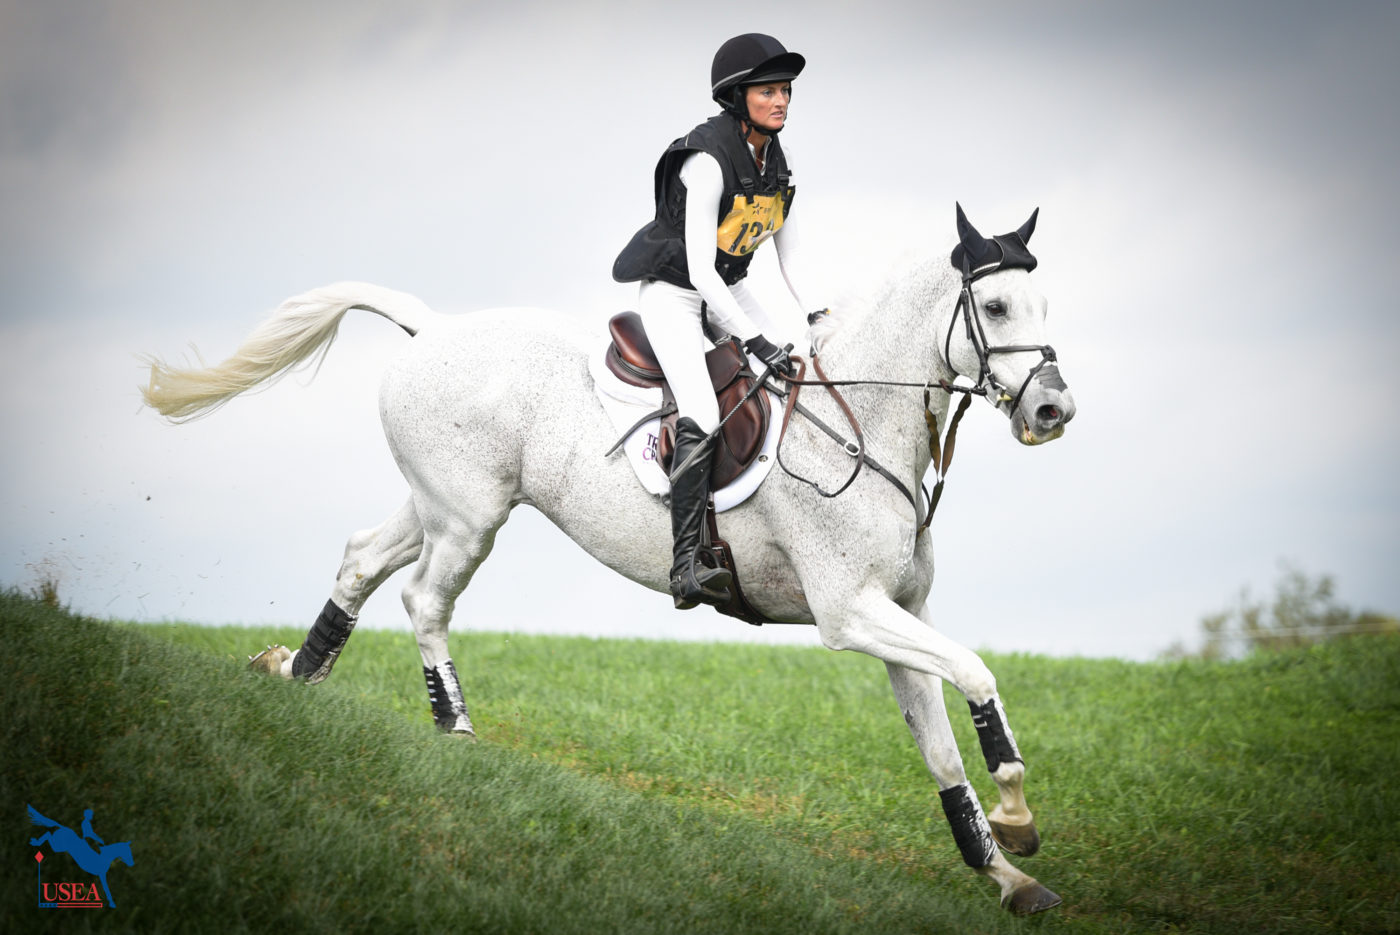 What Can You Expect for 2022? Preview the USEA Eventing Calendar Here.